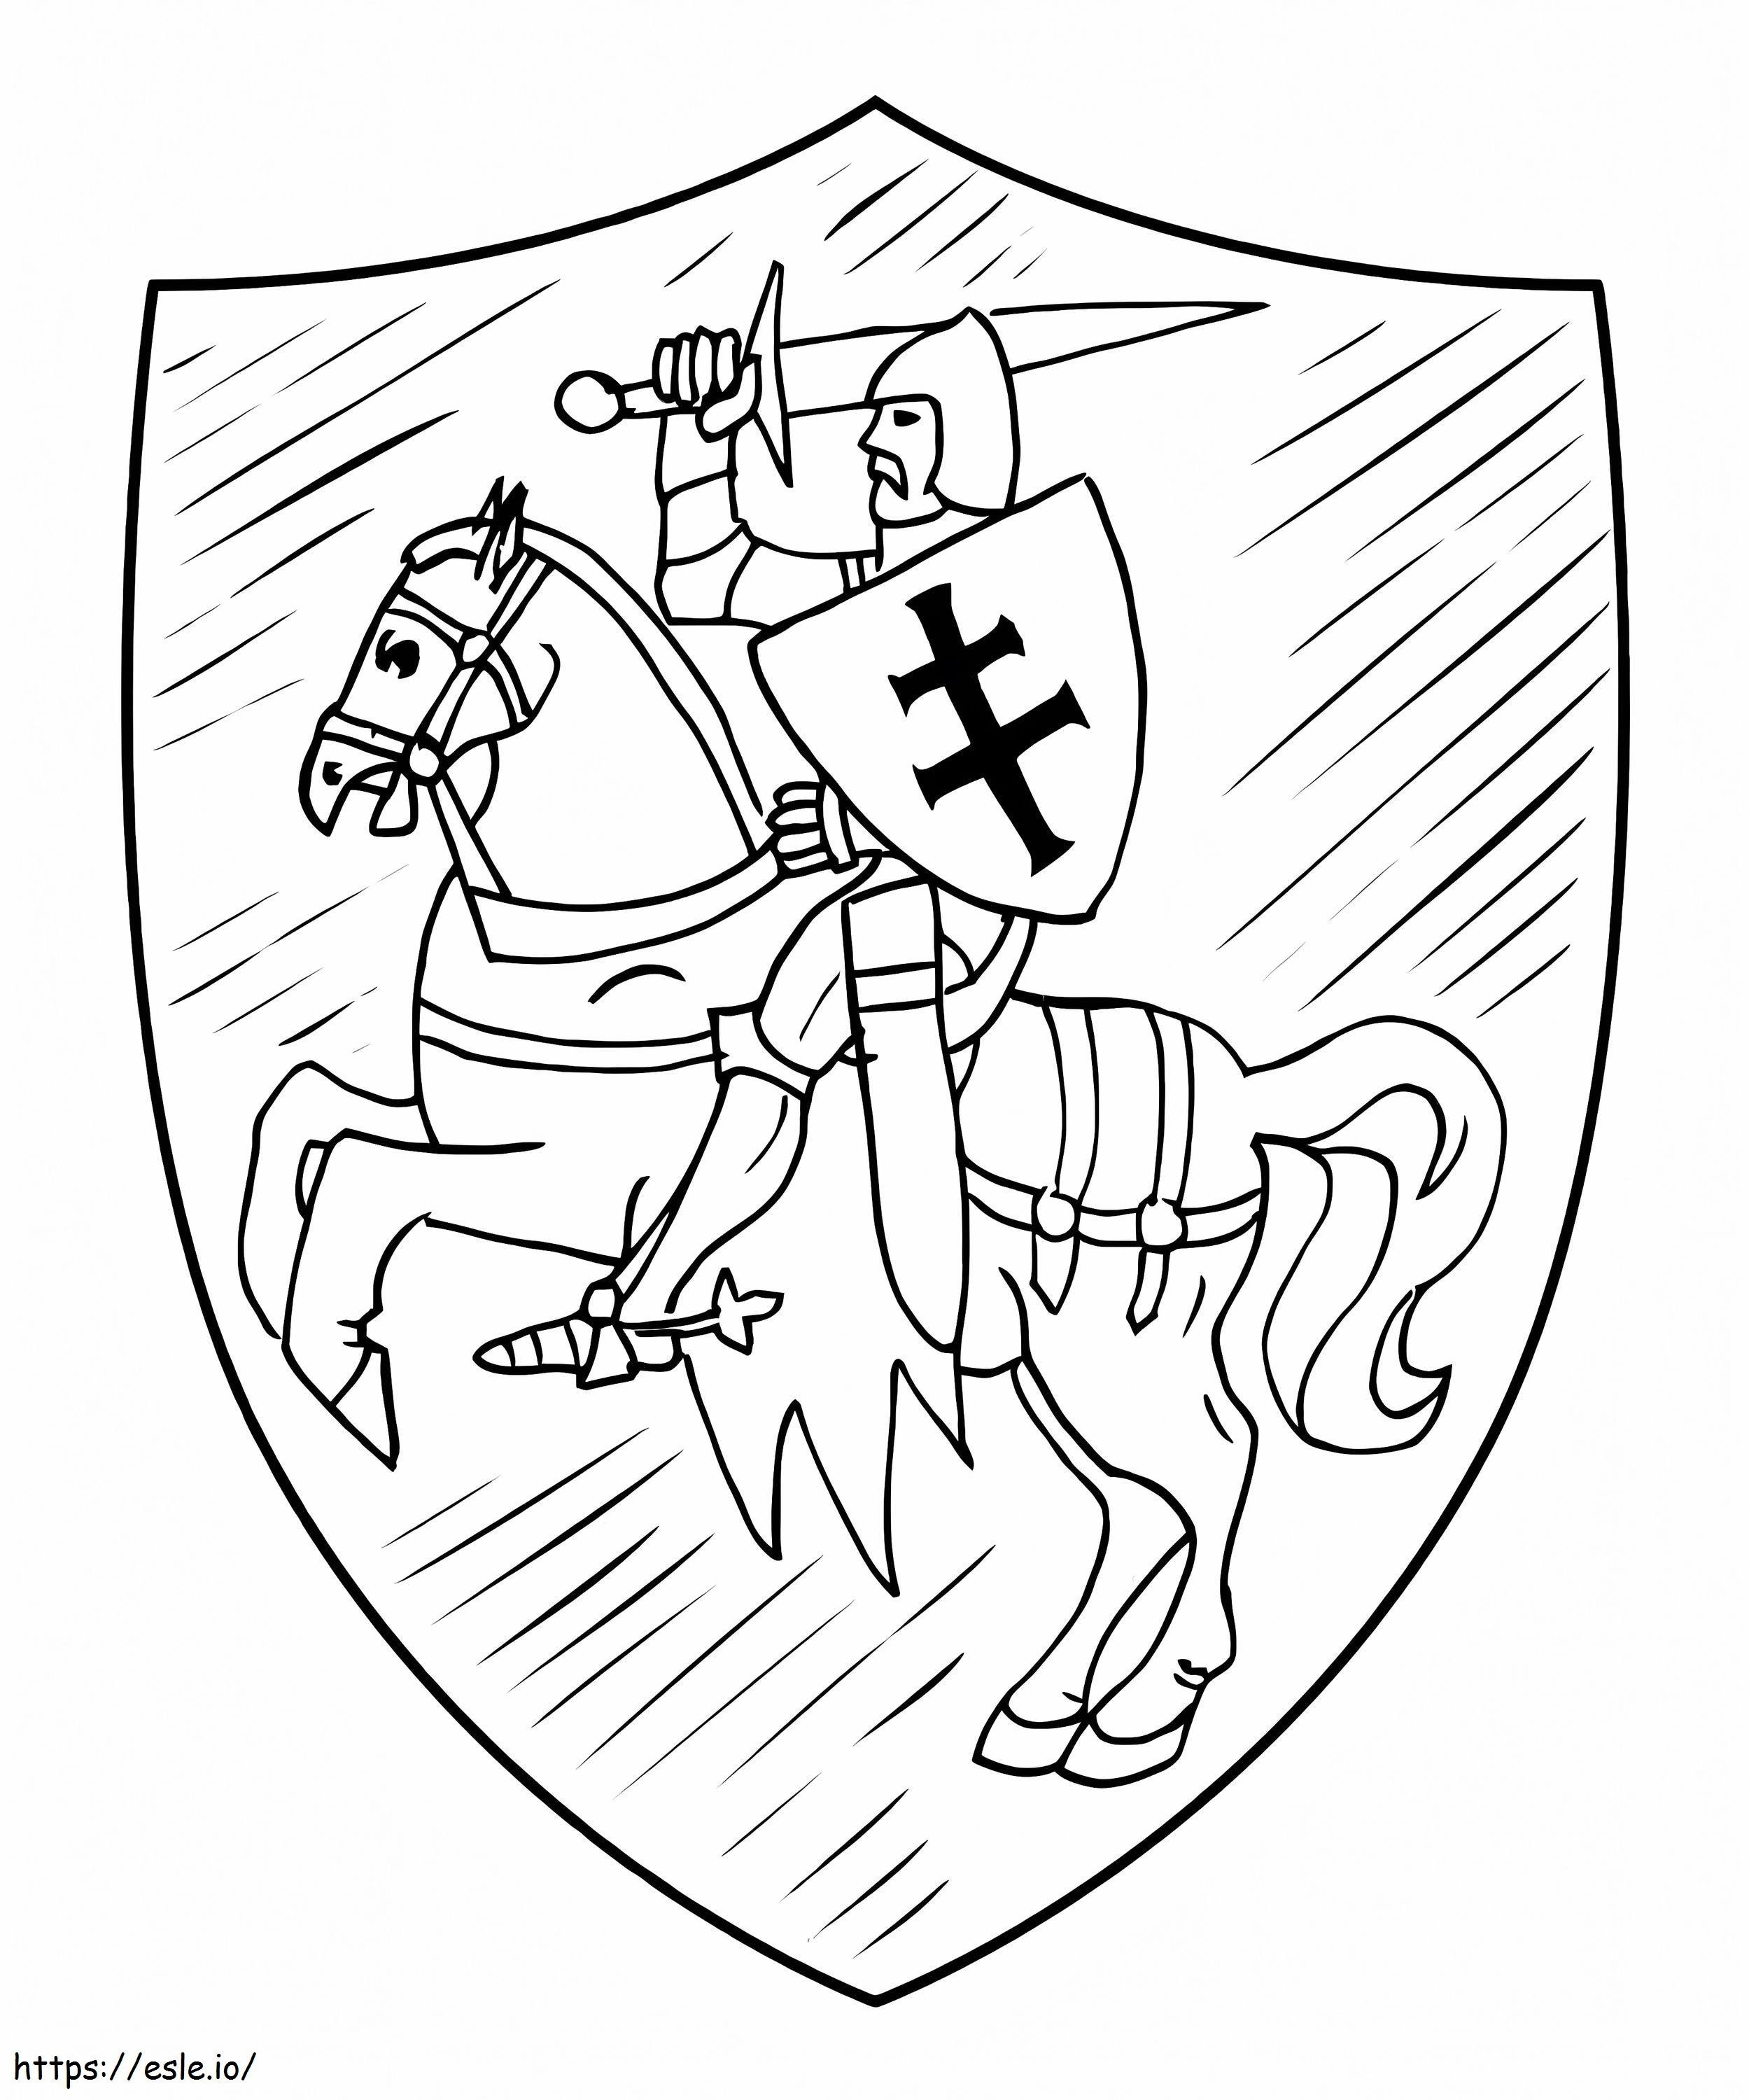 Coat Of Arms Of Belarus coloring page